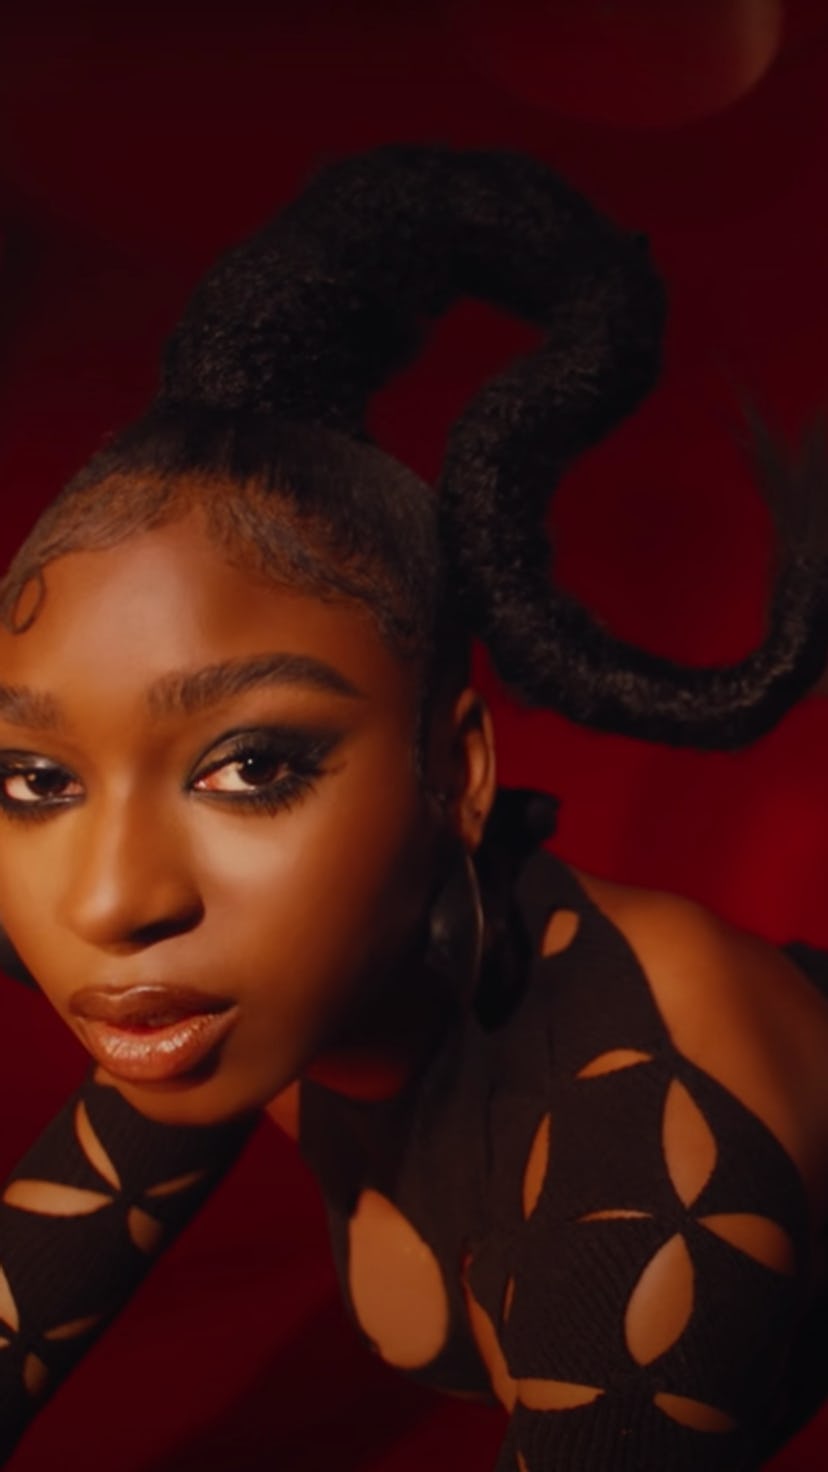 A still from Normani and Cardi B's "Wild Side" music video